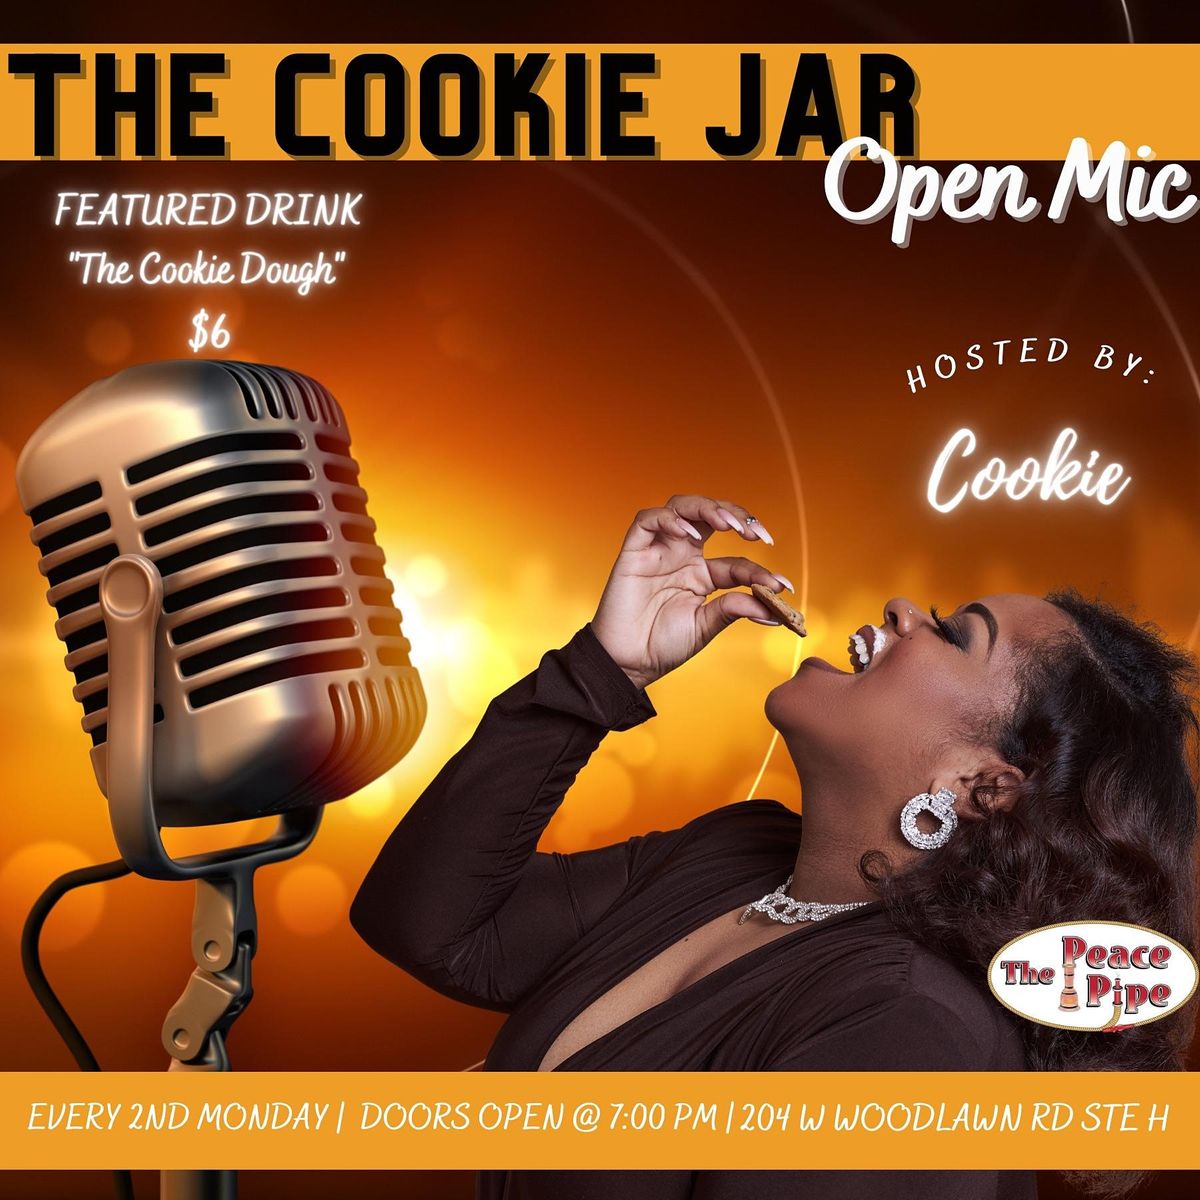 The Cookie Jar Open Mic